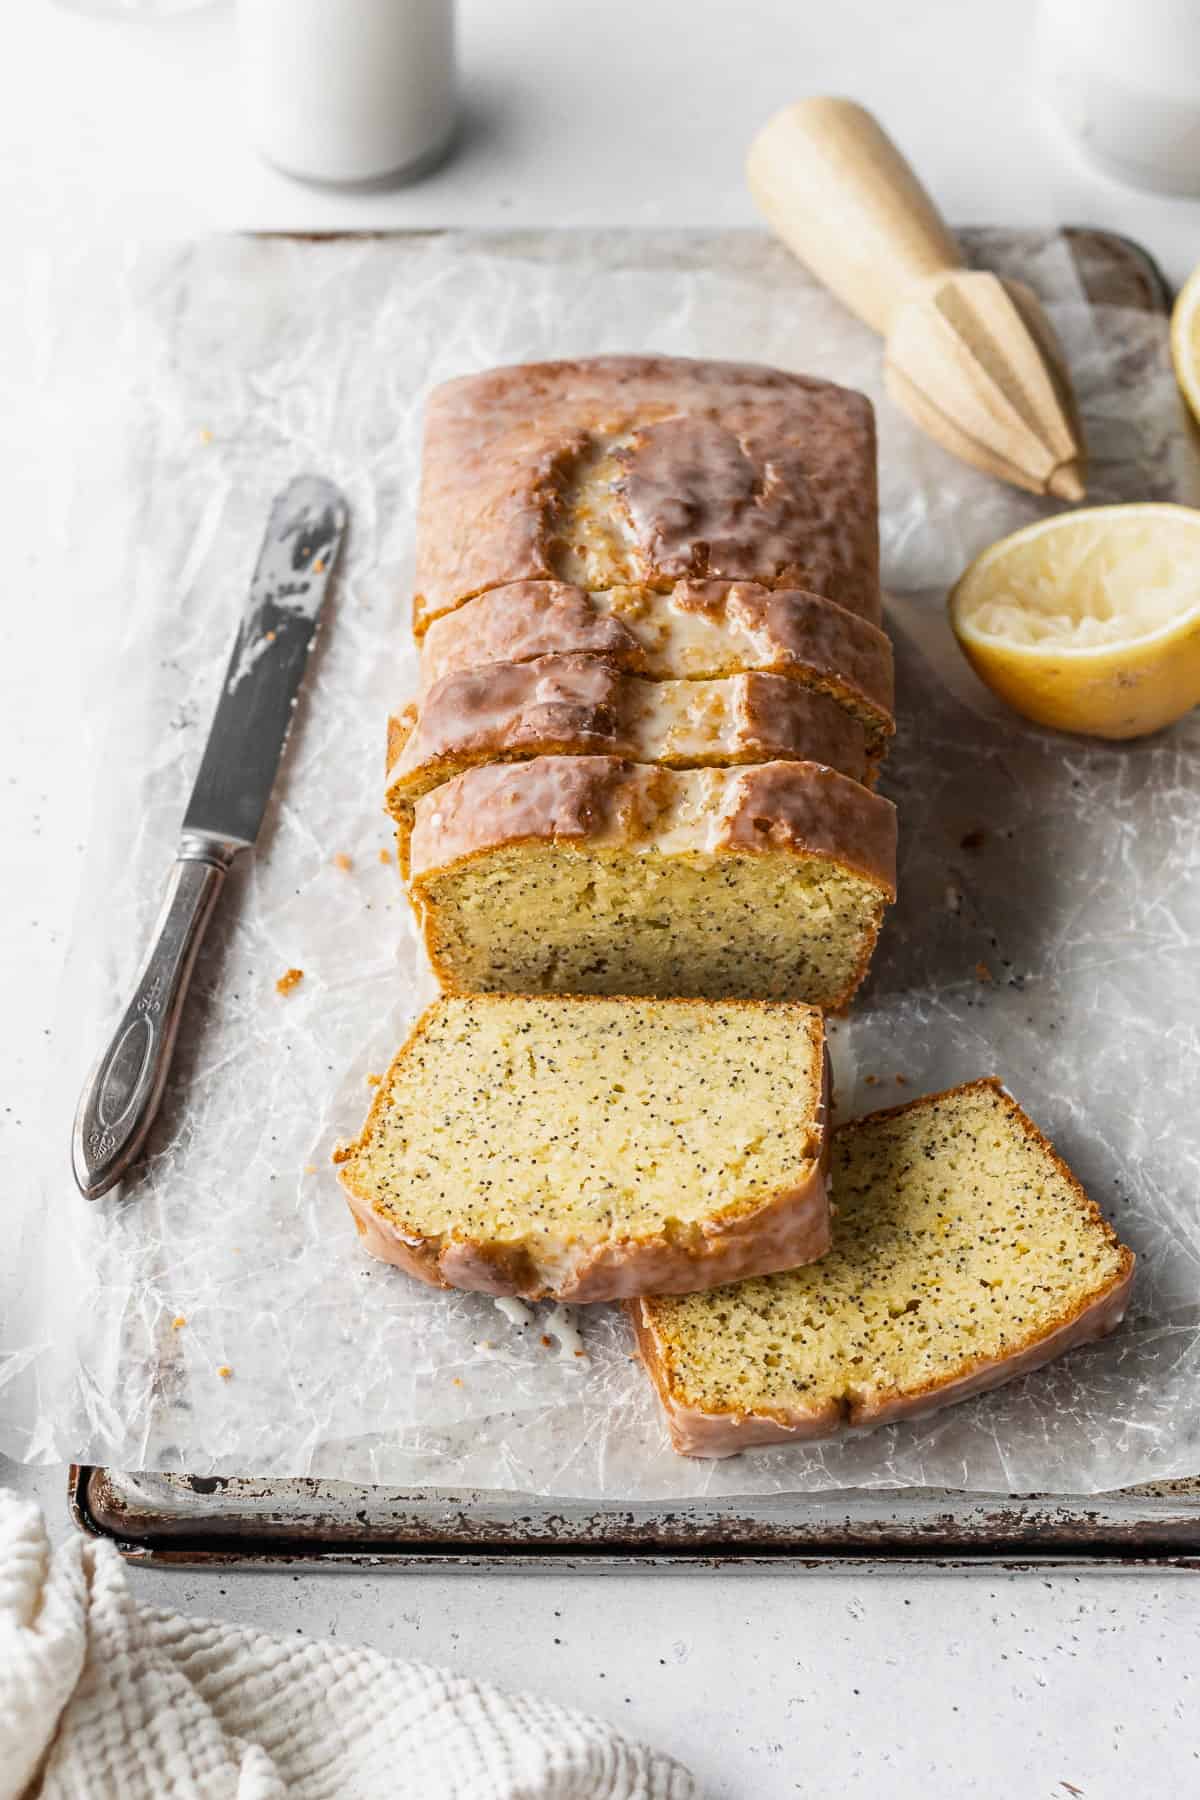 A sliced loaf of gluten-free lemon poppy seed loaf on a parchment paper lined baking sheet with a knife, half a lemon, and a wooden citrus zester placed around it.